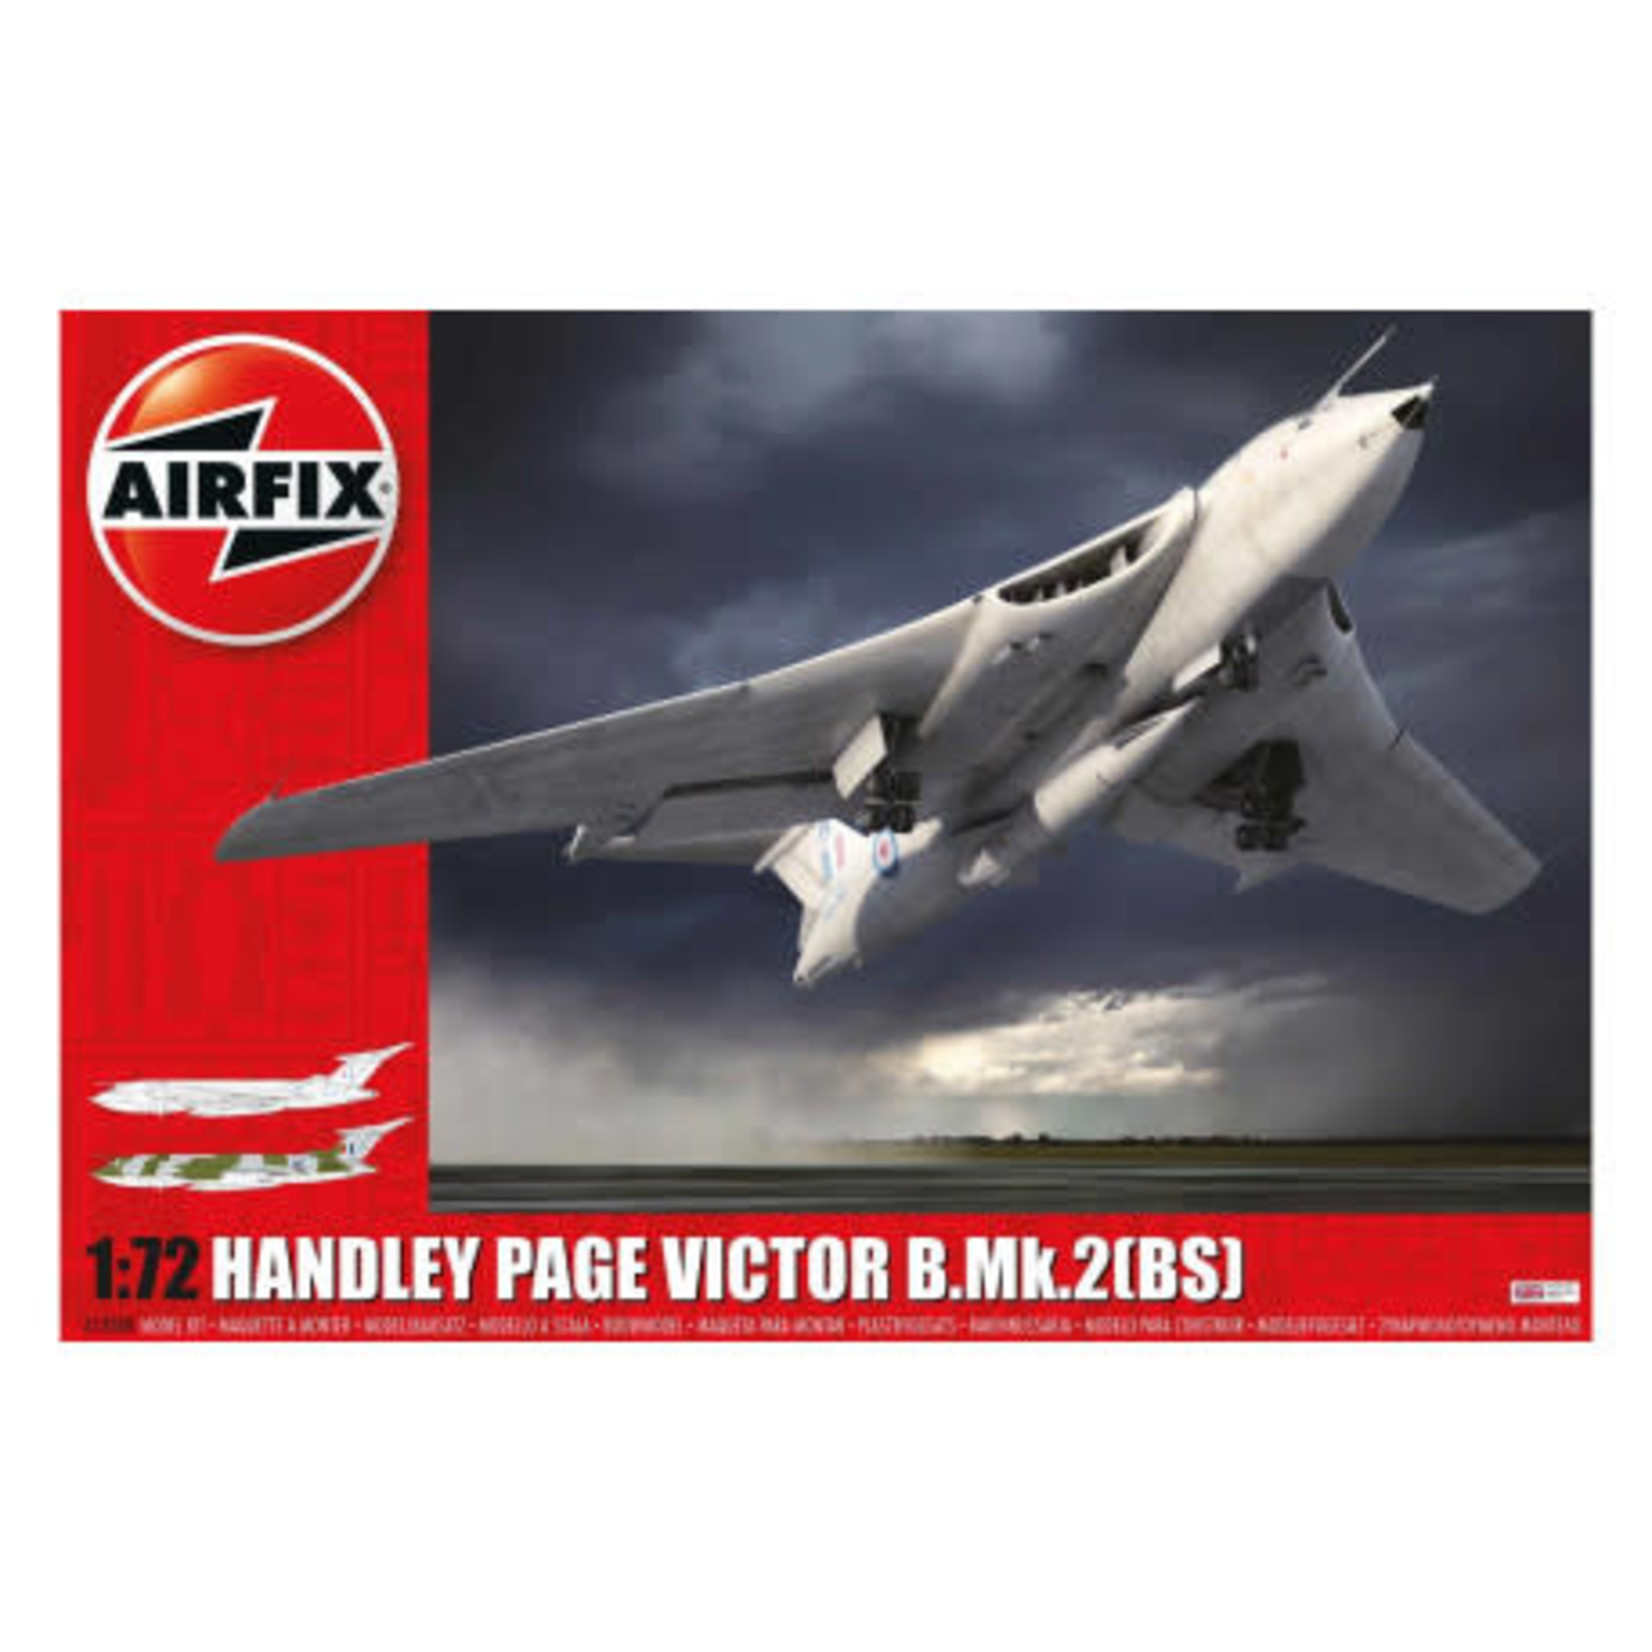 Aviation and Space Kit modéle Handley Page Victor B.Mk.2 (BS)